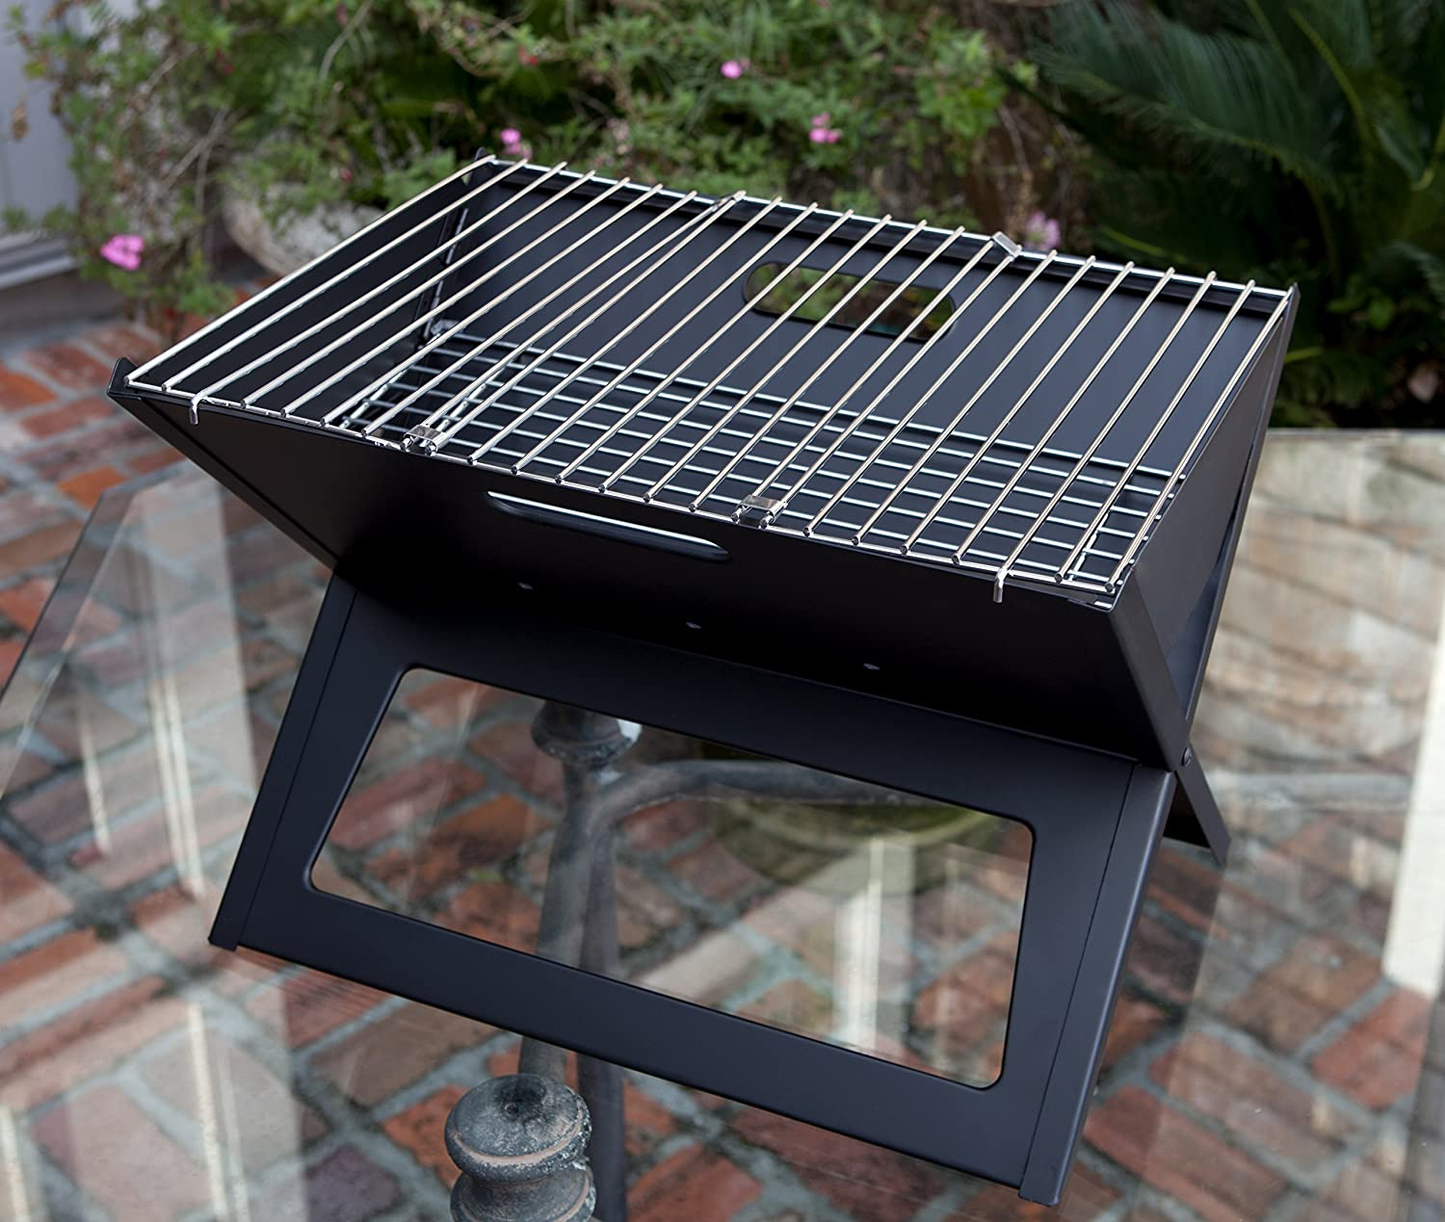 60508 Notebook BBQ Grill Instant Foldable and Easy Portability - Charcoal Grill